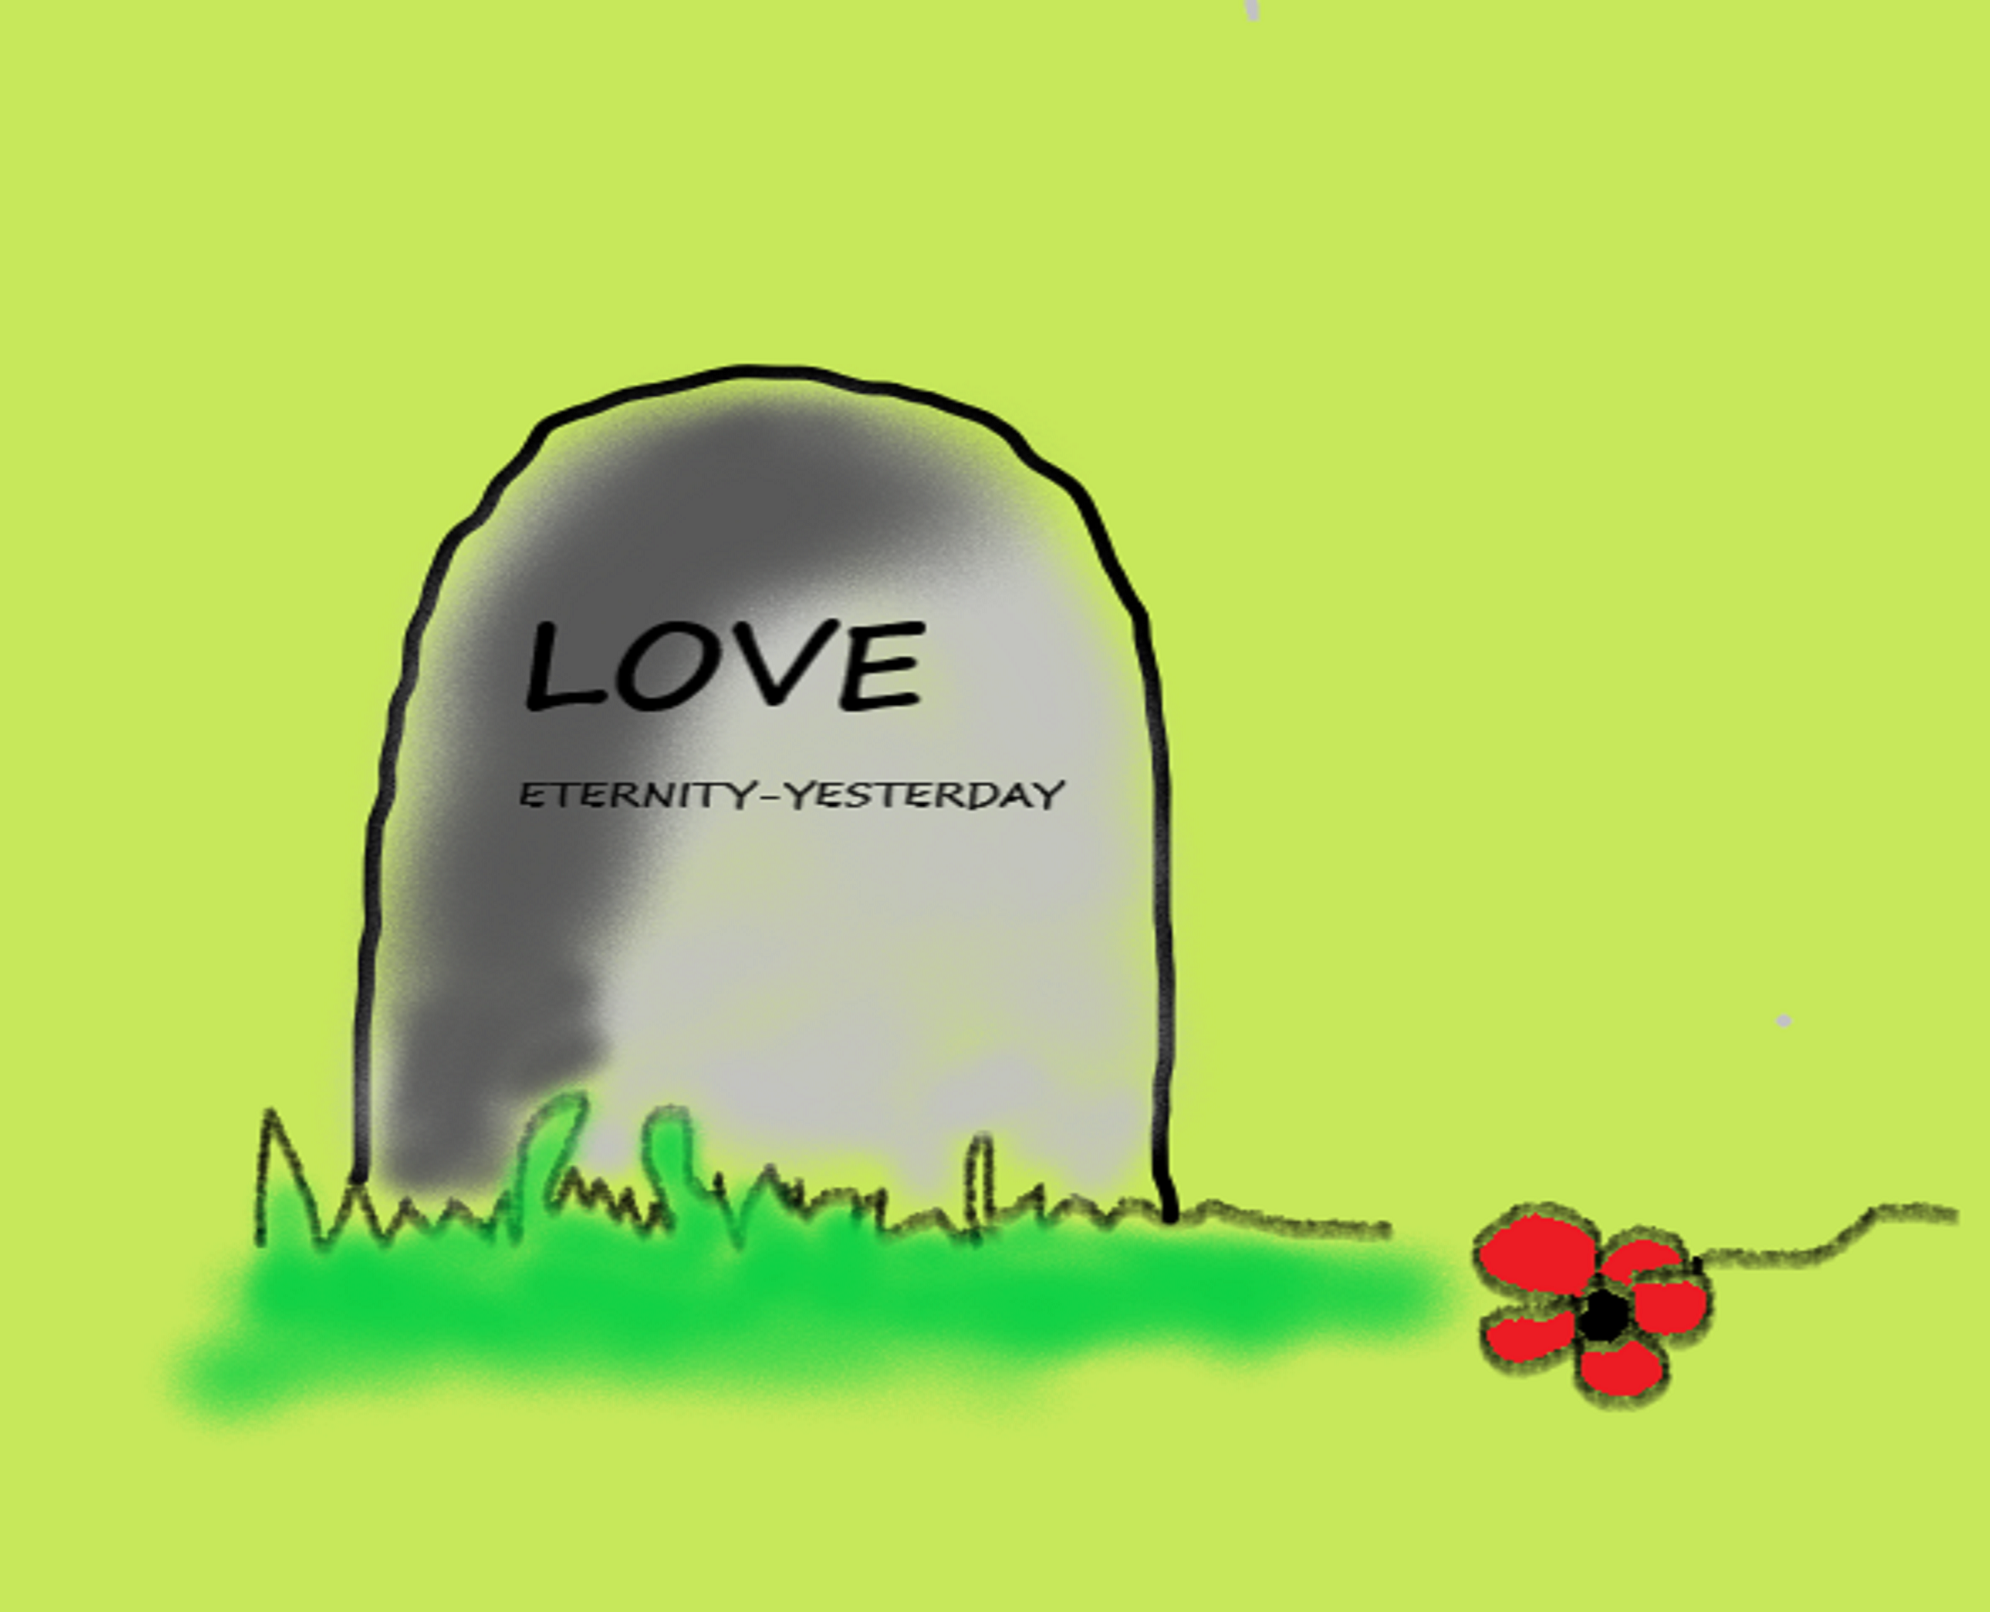 An illustration of a grave with eternity ,forever written on it